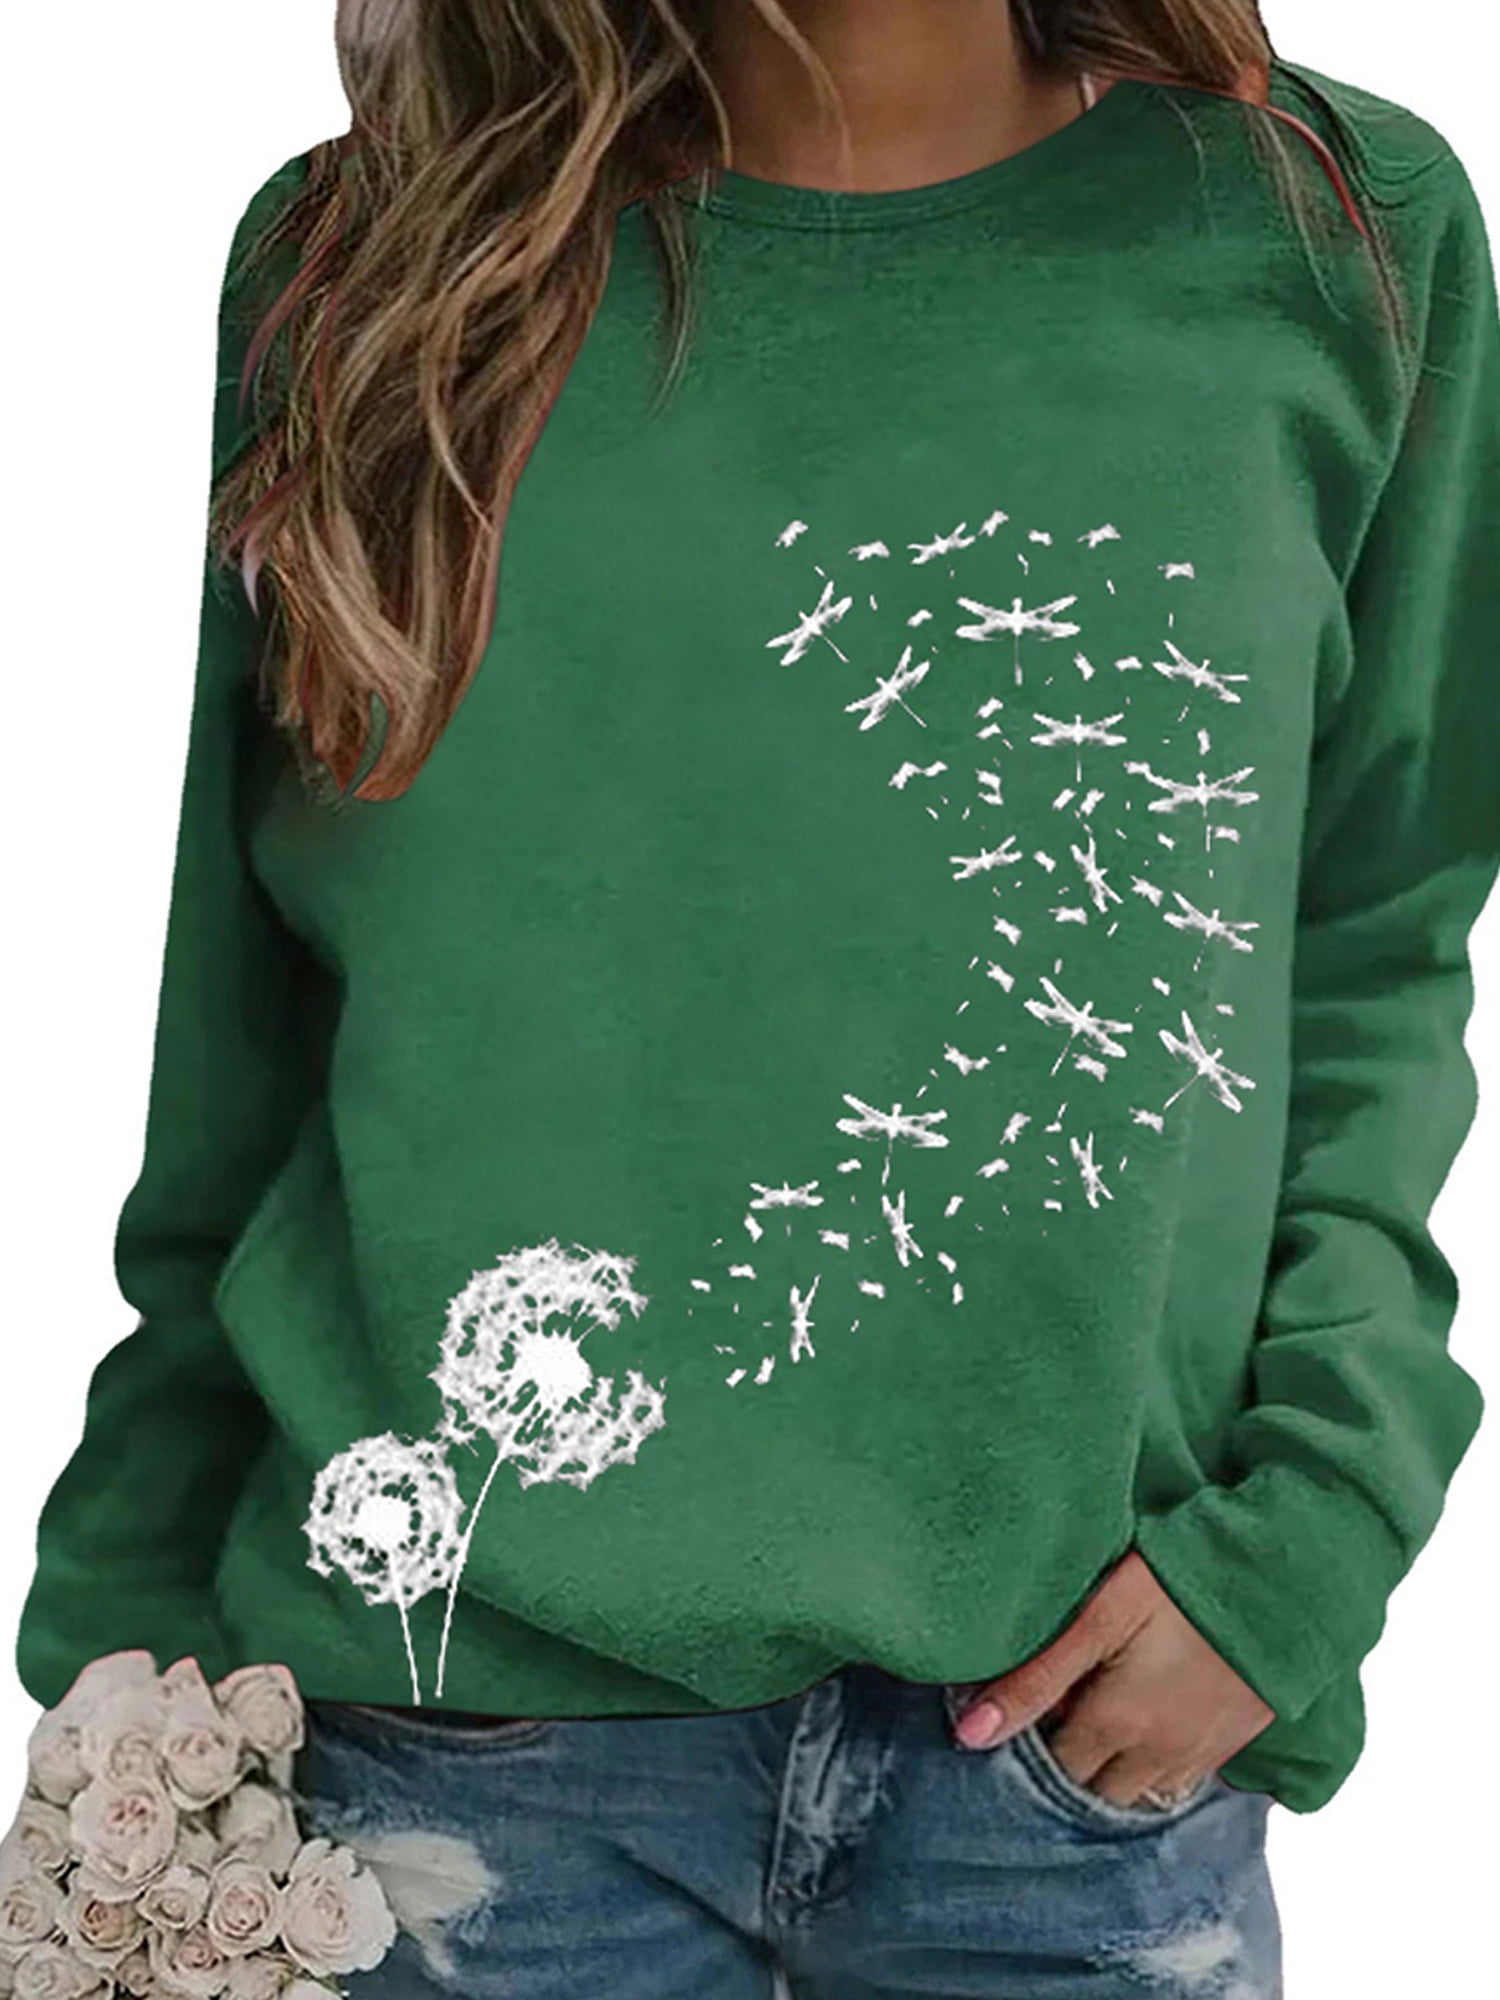 Lozeny Women Cat Dandelion Graphic Tops Shirts Cute Crewneck Long Sleeve Pullover Fashion Lightweight Casual Sweaters Tee 